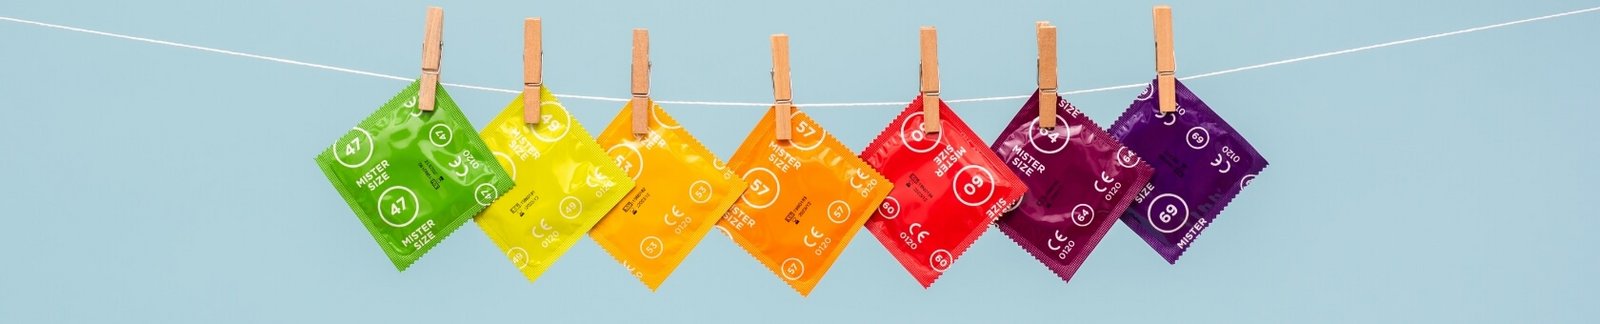 7 Mister Size condoms on the clothesline